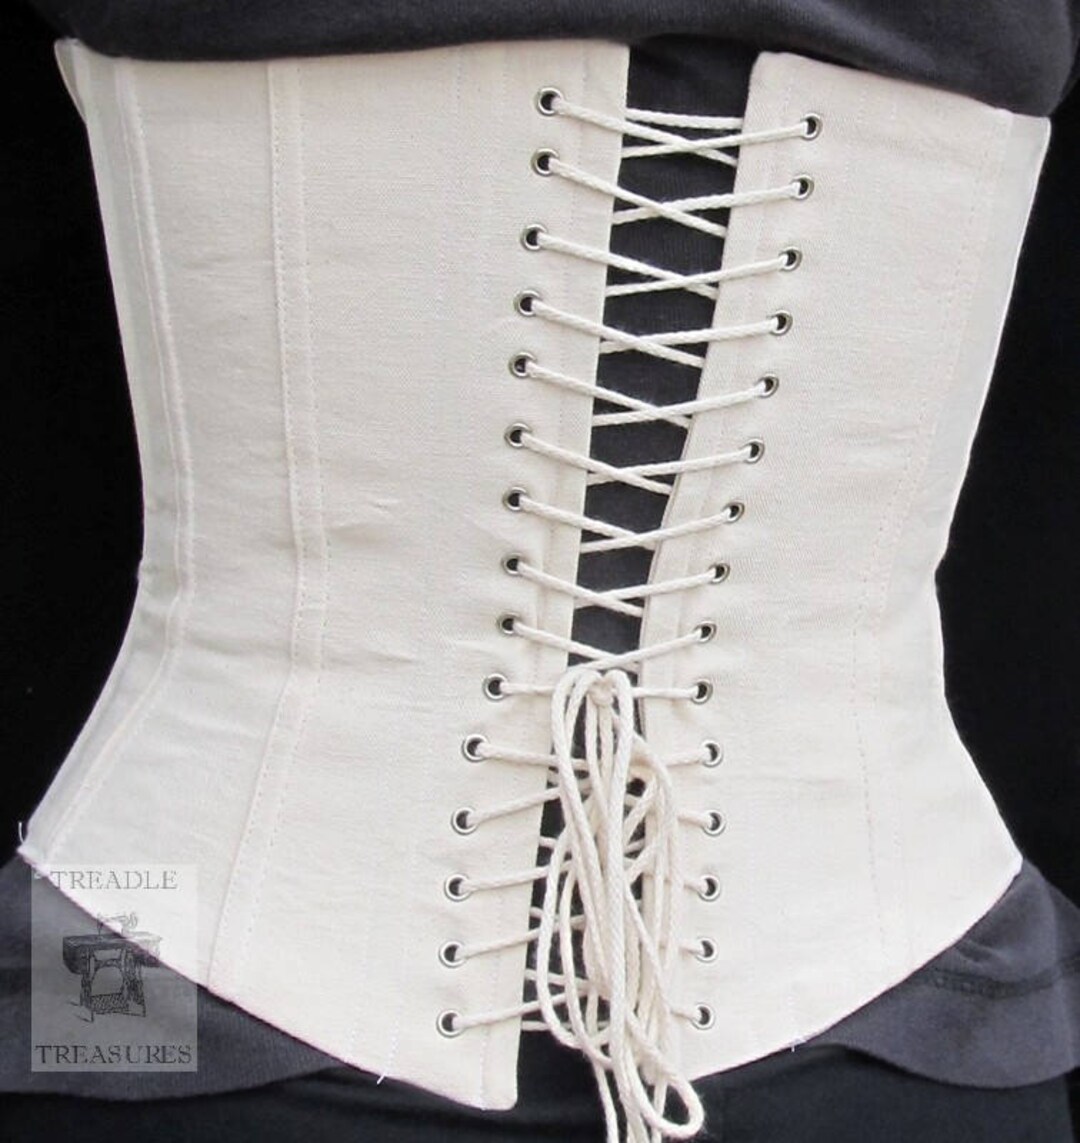 Hi everyone so I'm making a corset but my eyelets wont bend well